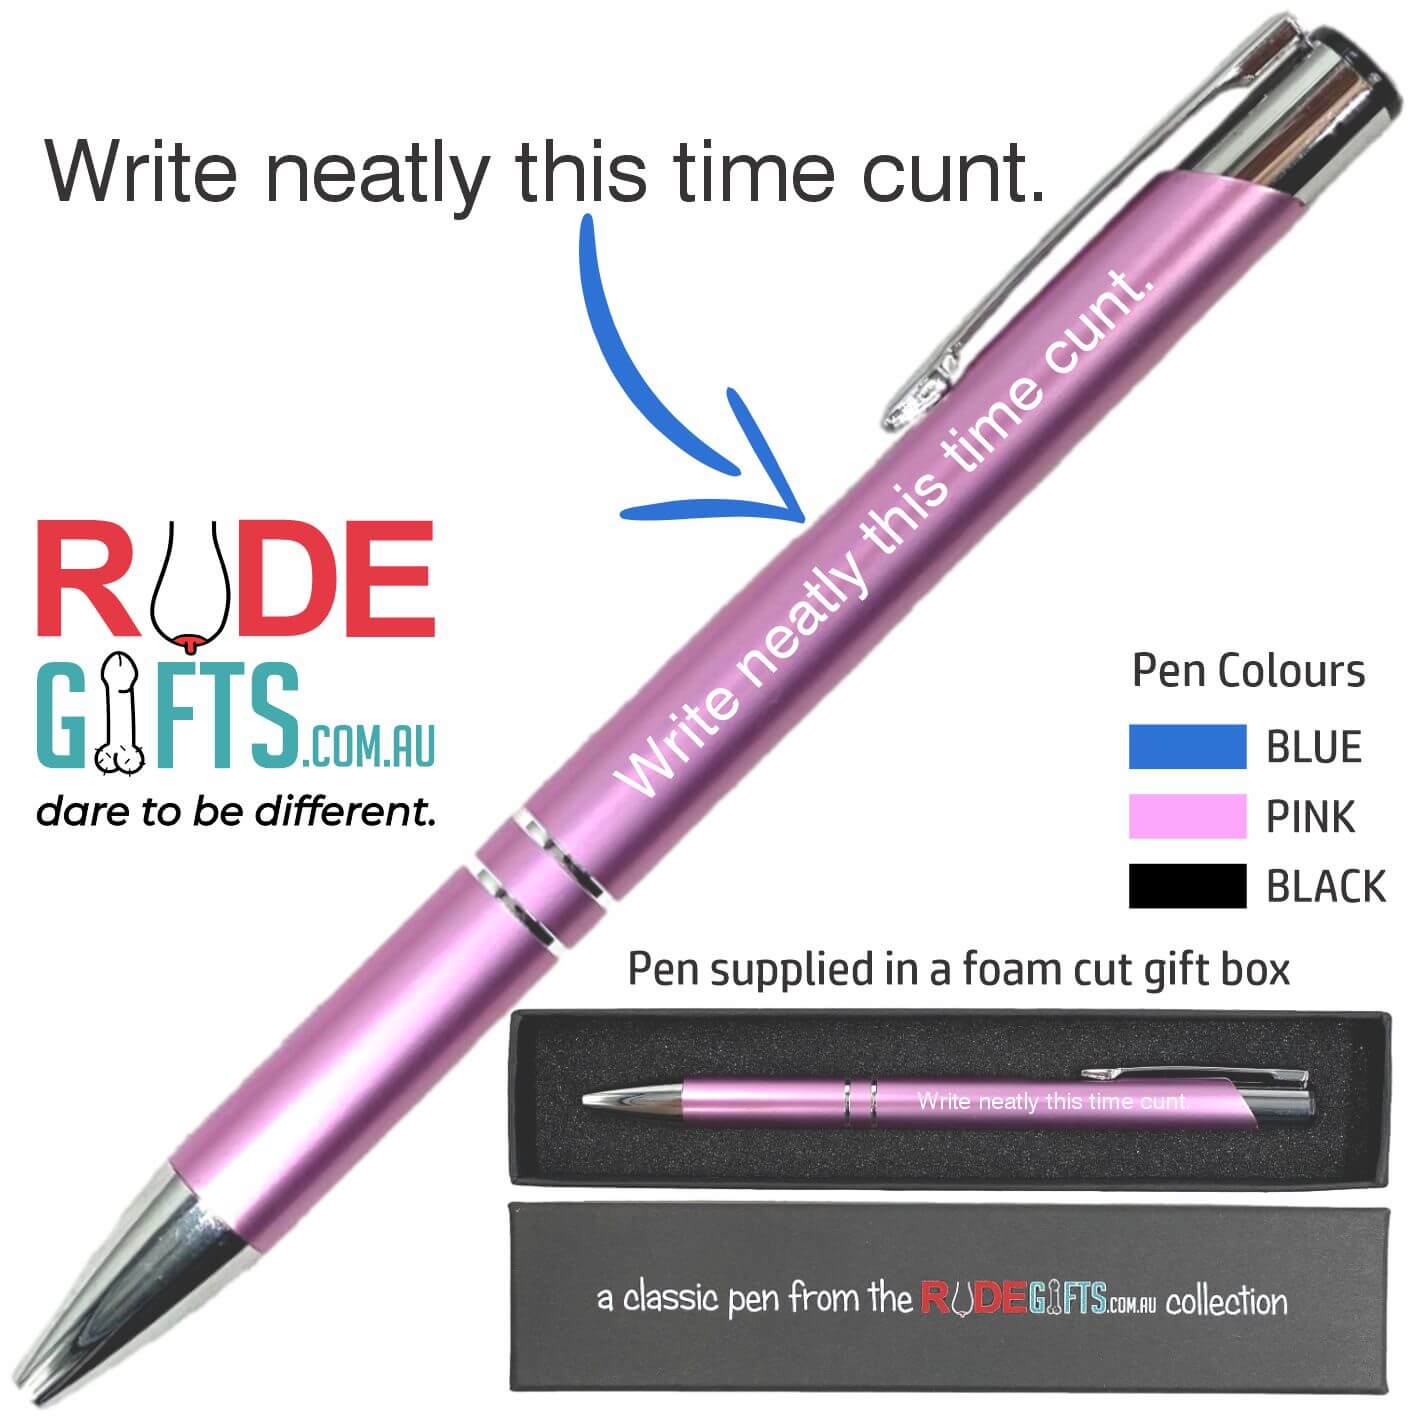 Write neatly this time cunt.